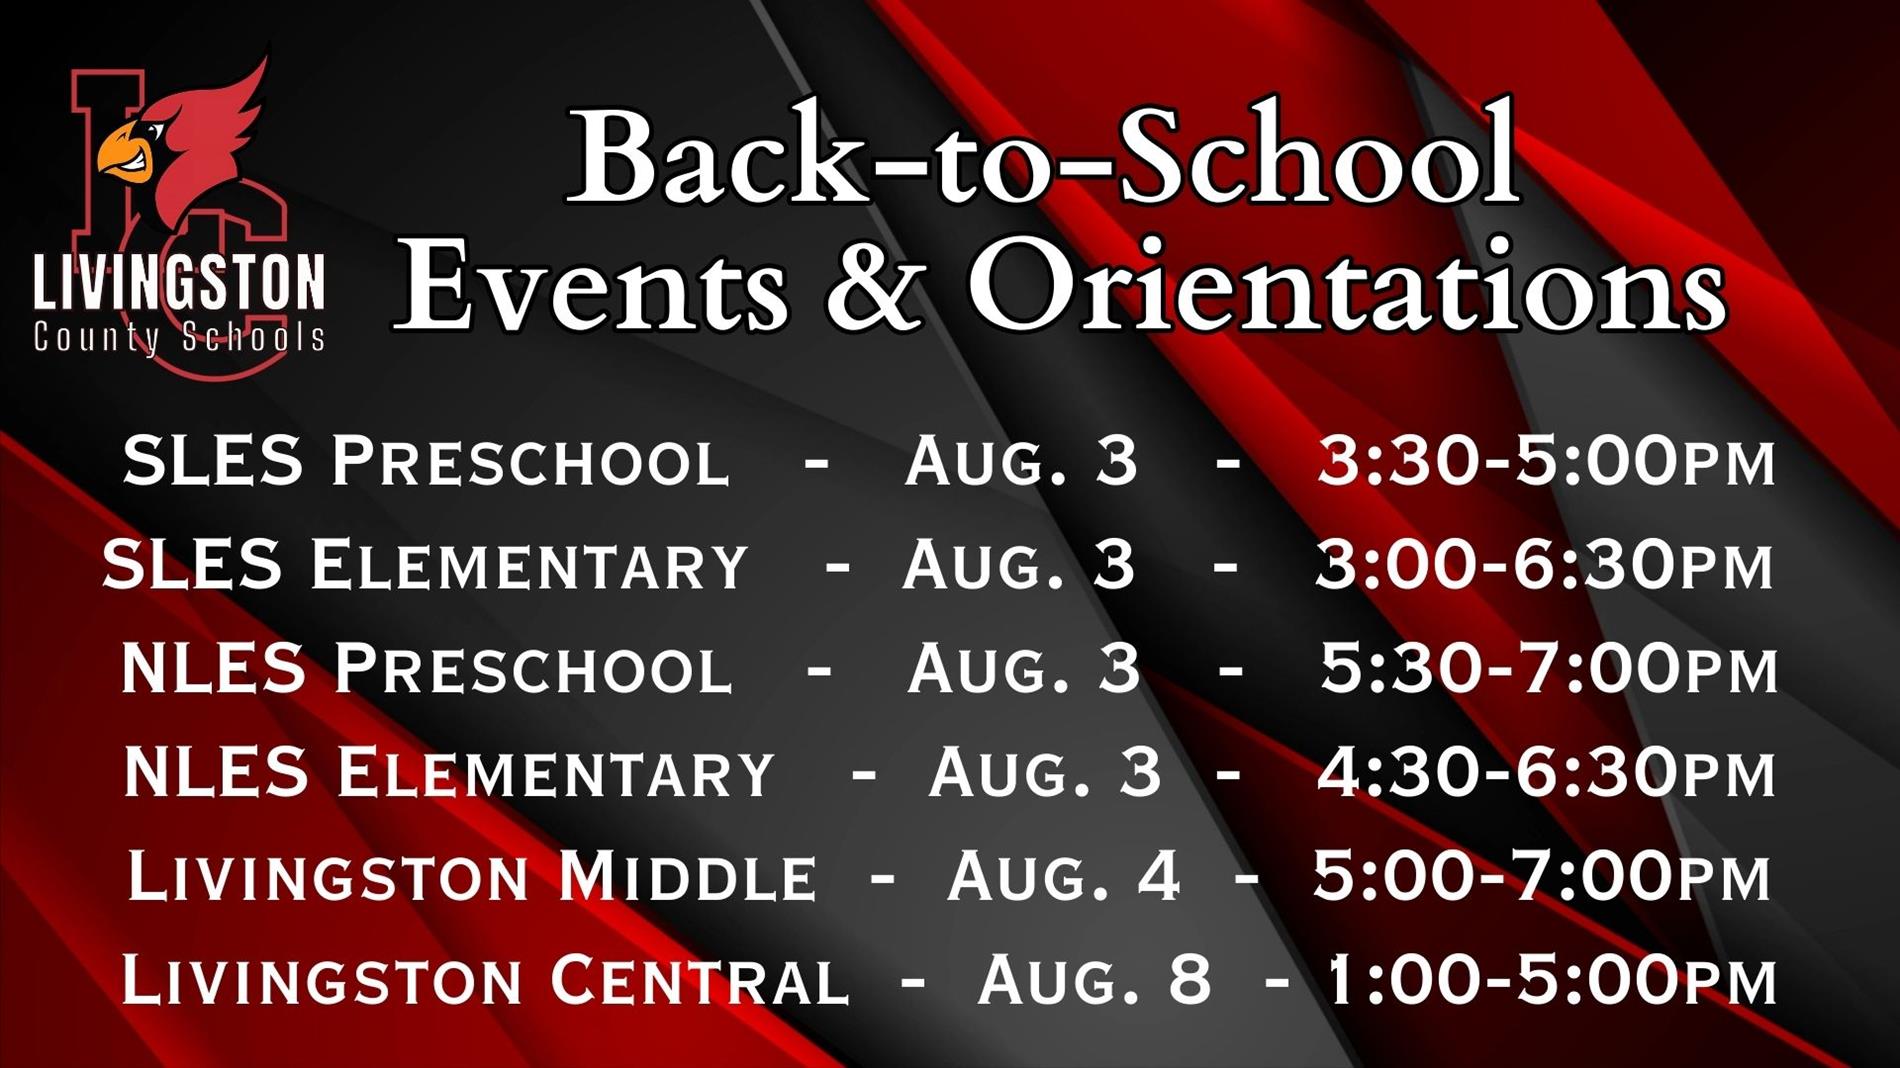 Back-to-School Events and Orientations